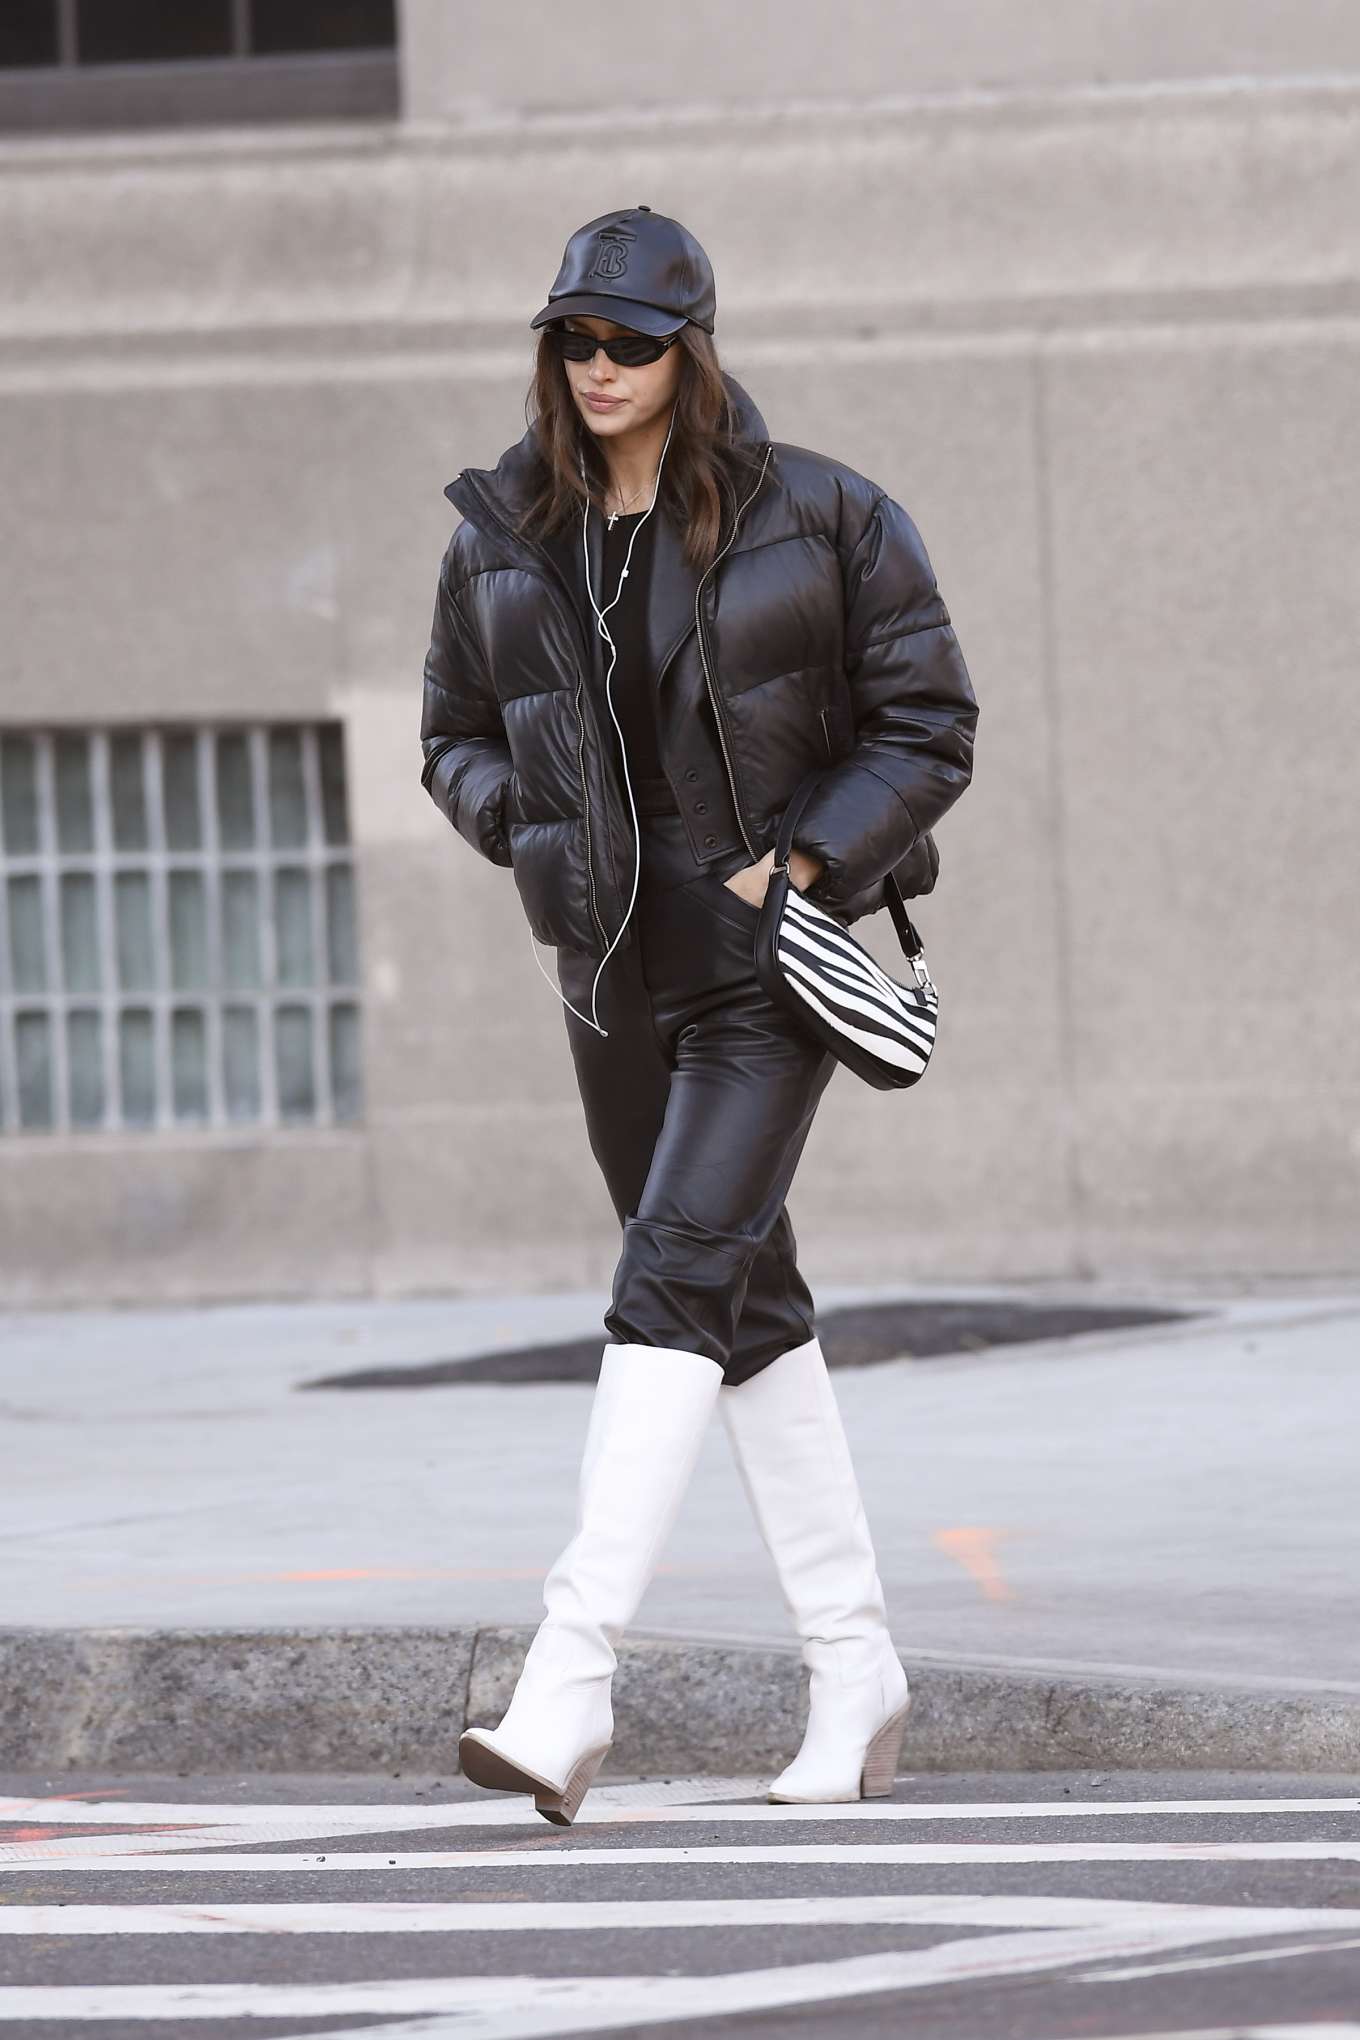 Irina Shayk in Leather Pants and Knee High Boots-21 | GotCeleb